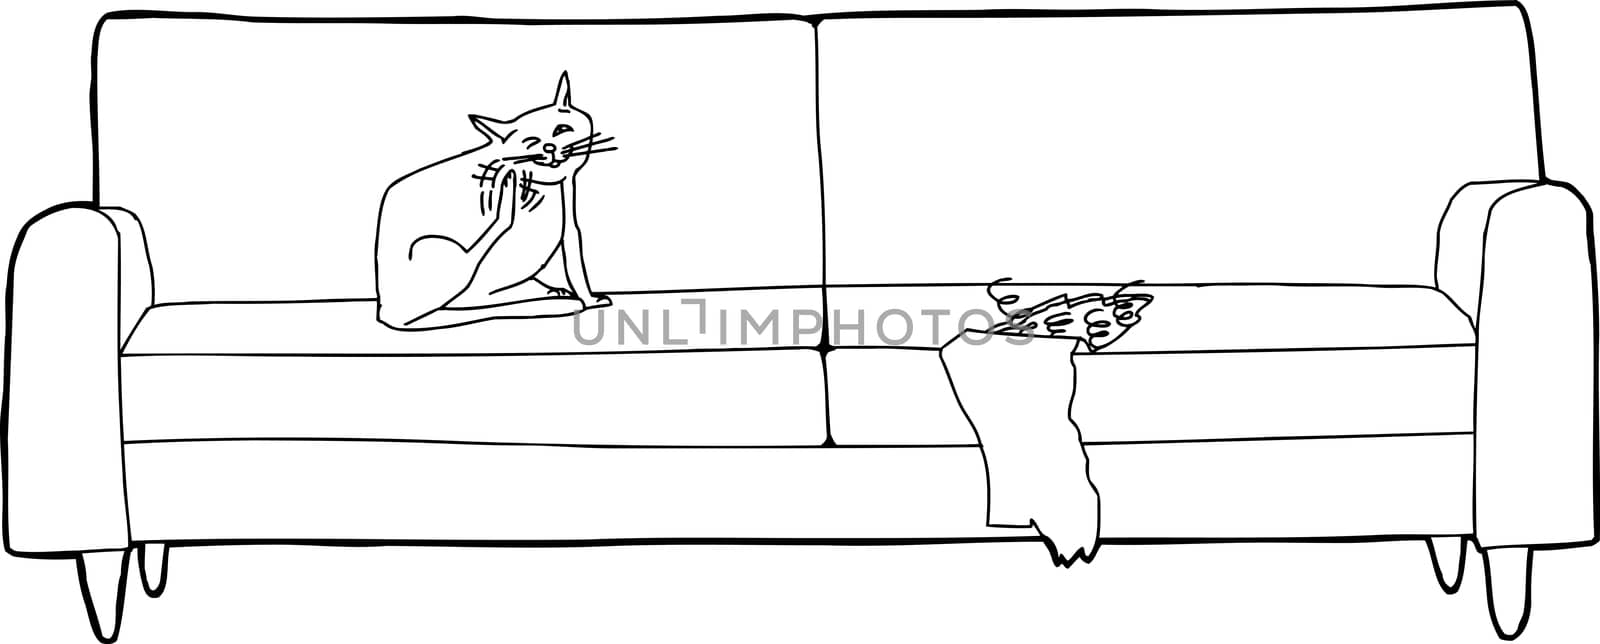 Cartoon outline of cat sitting on ripped sofa